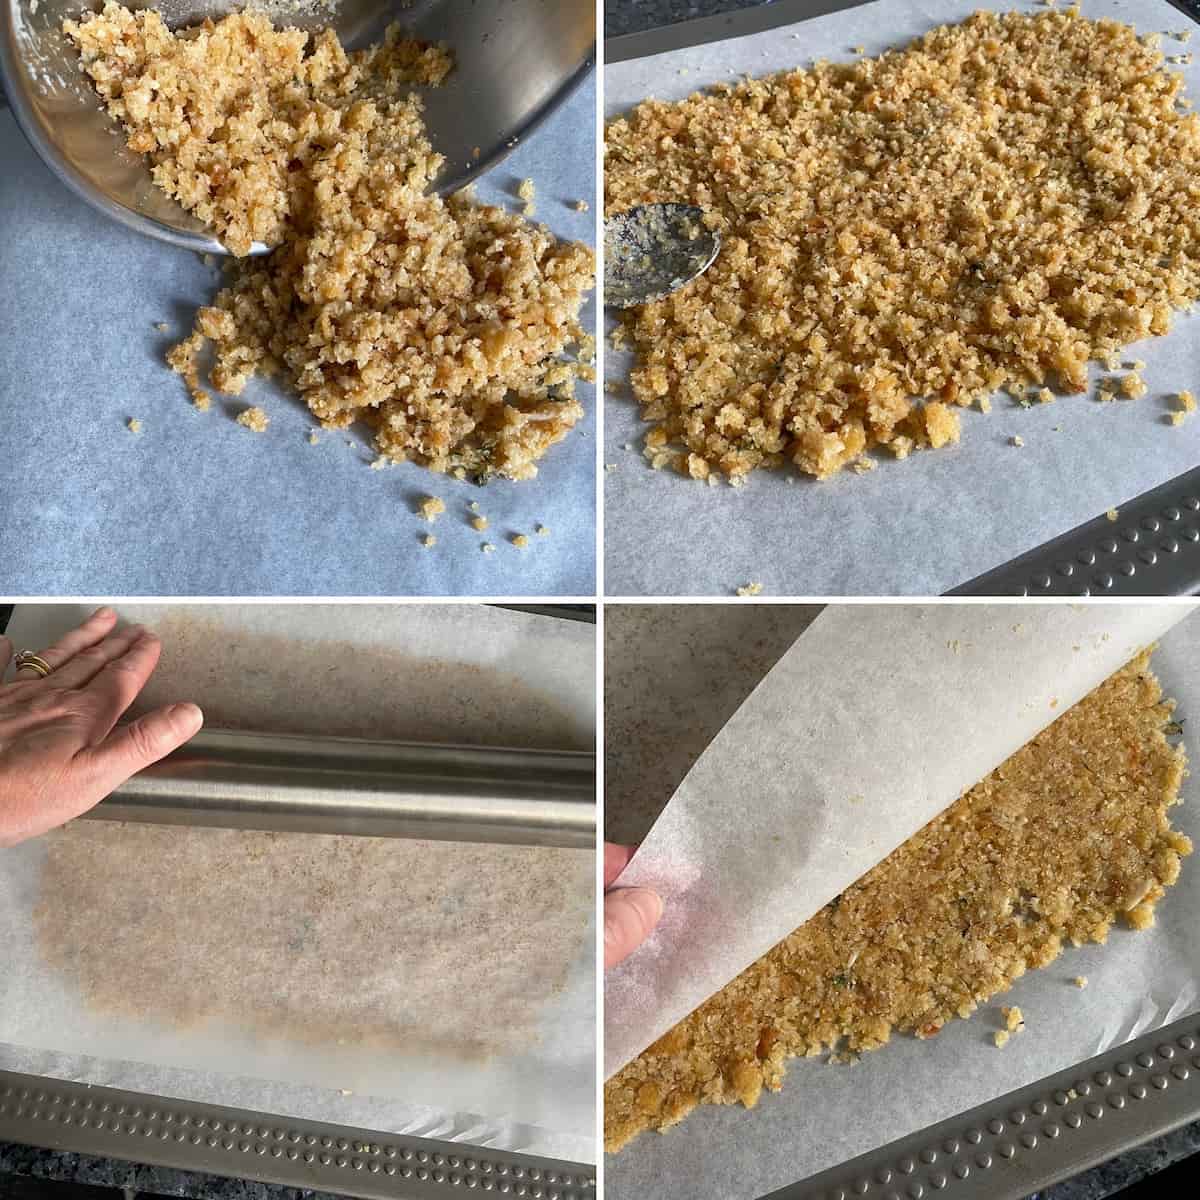 spread the breadcrumb mixture on a lined baking sheet, top with parchment paper and flatten with a rolling pin